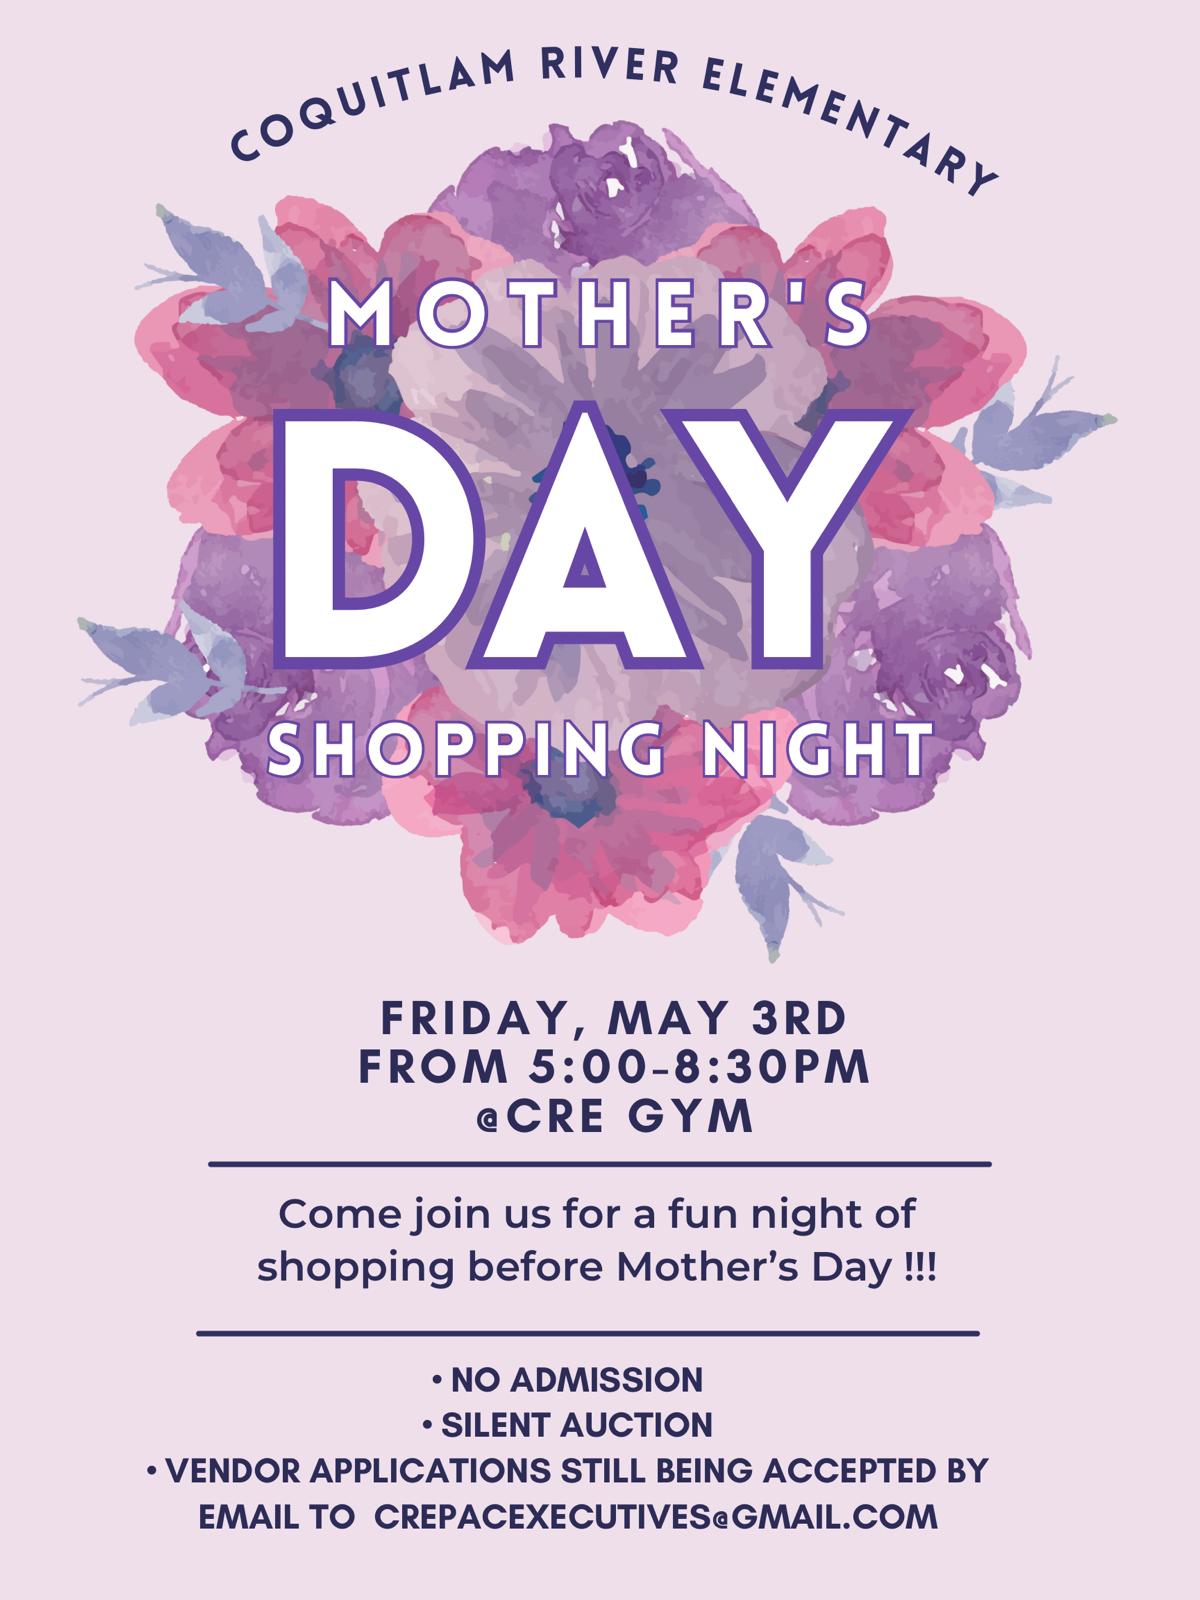 Mother's Day Shopping Night at Coquitlam River Elementary